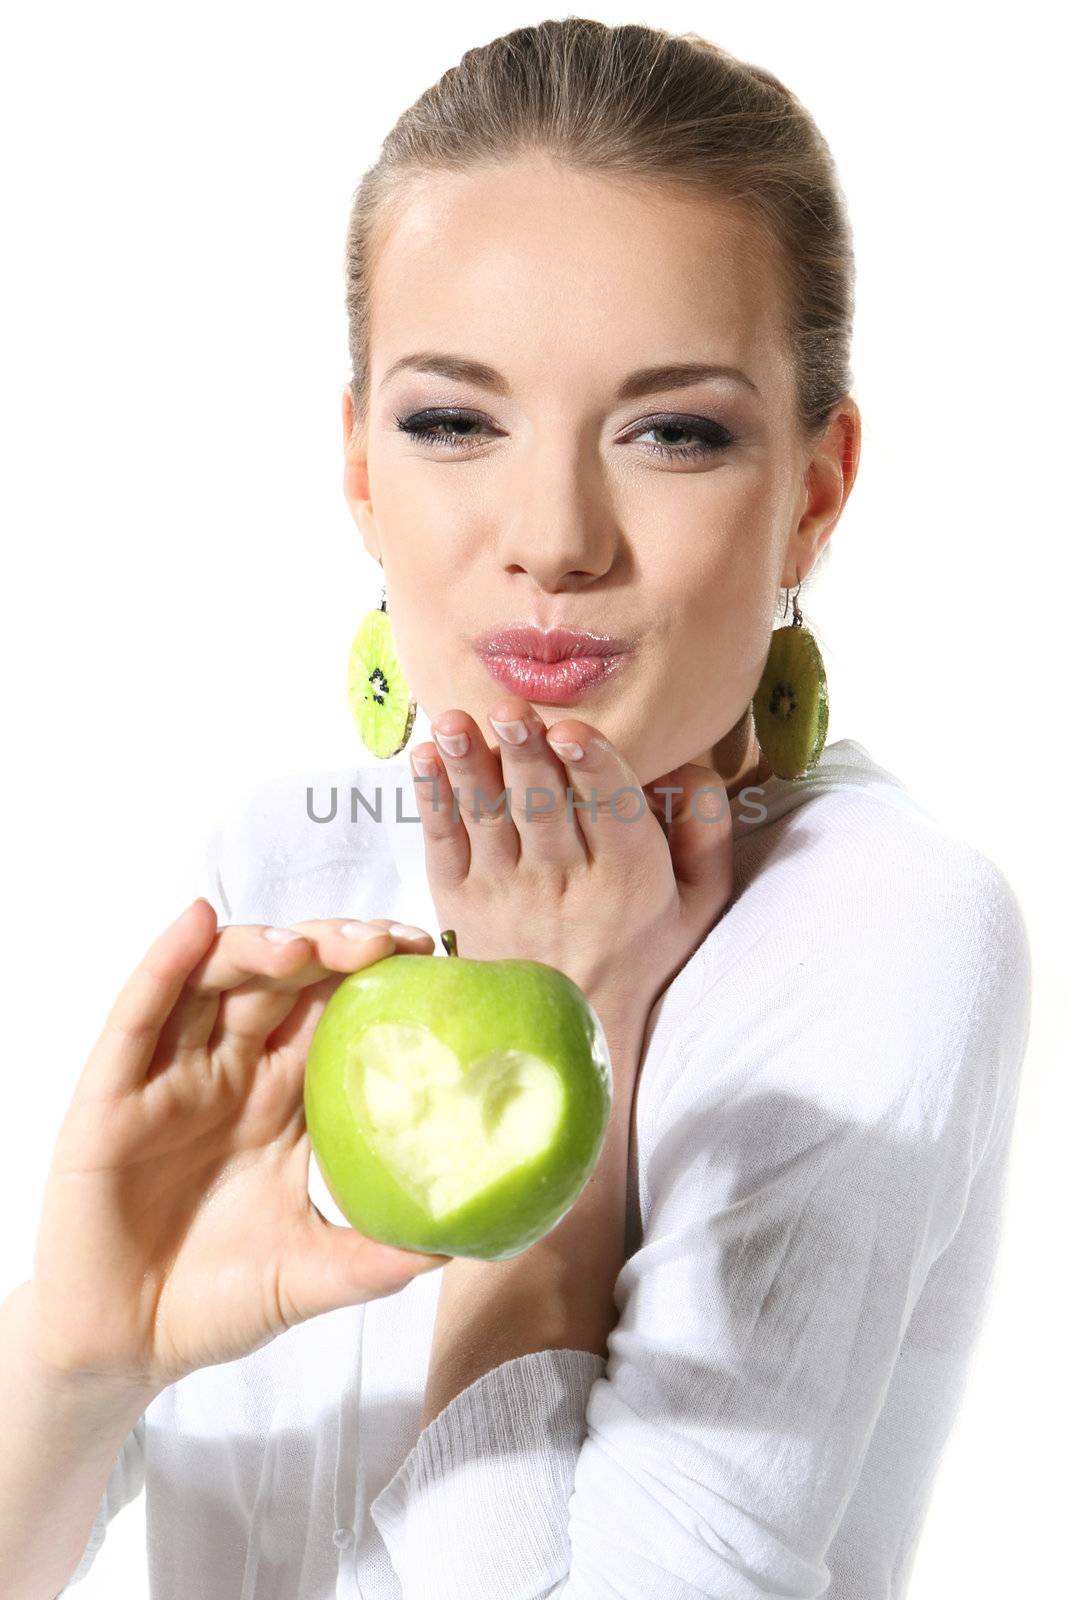 Girl with a green apple on a white background by robert_przybysz